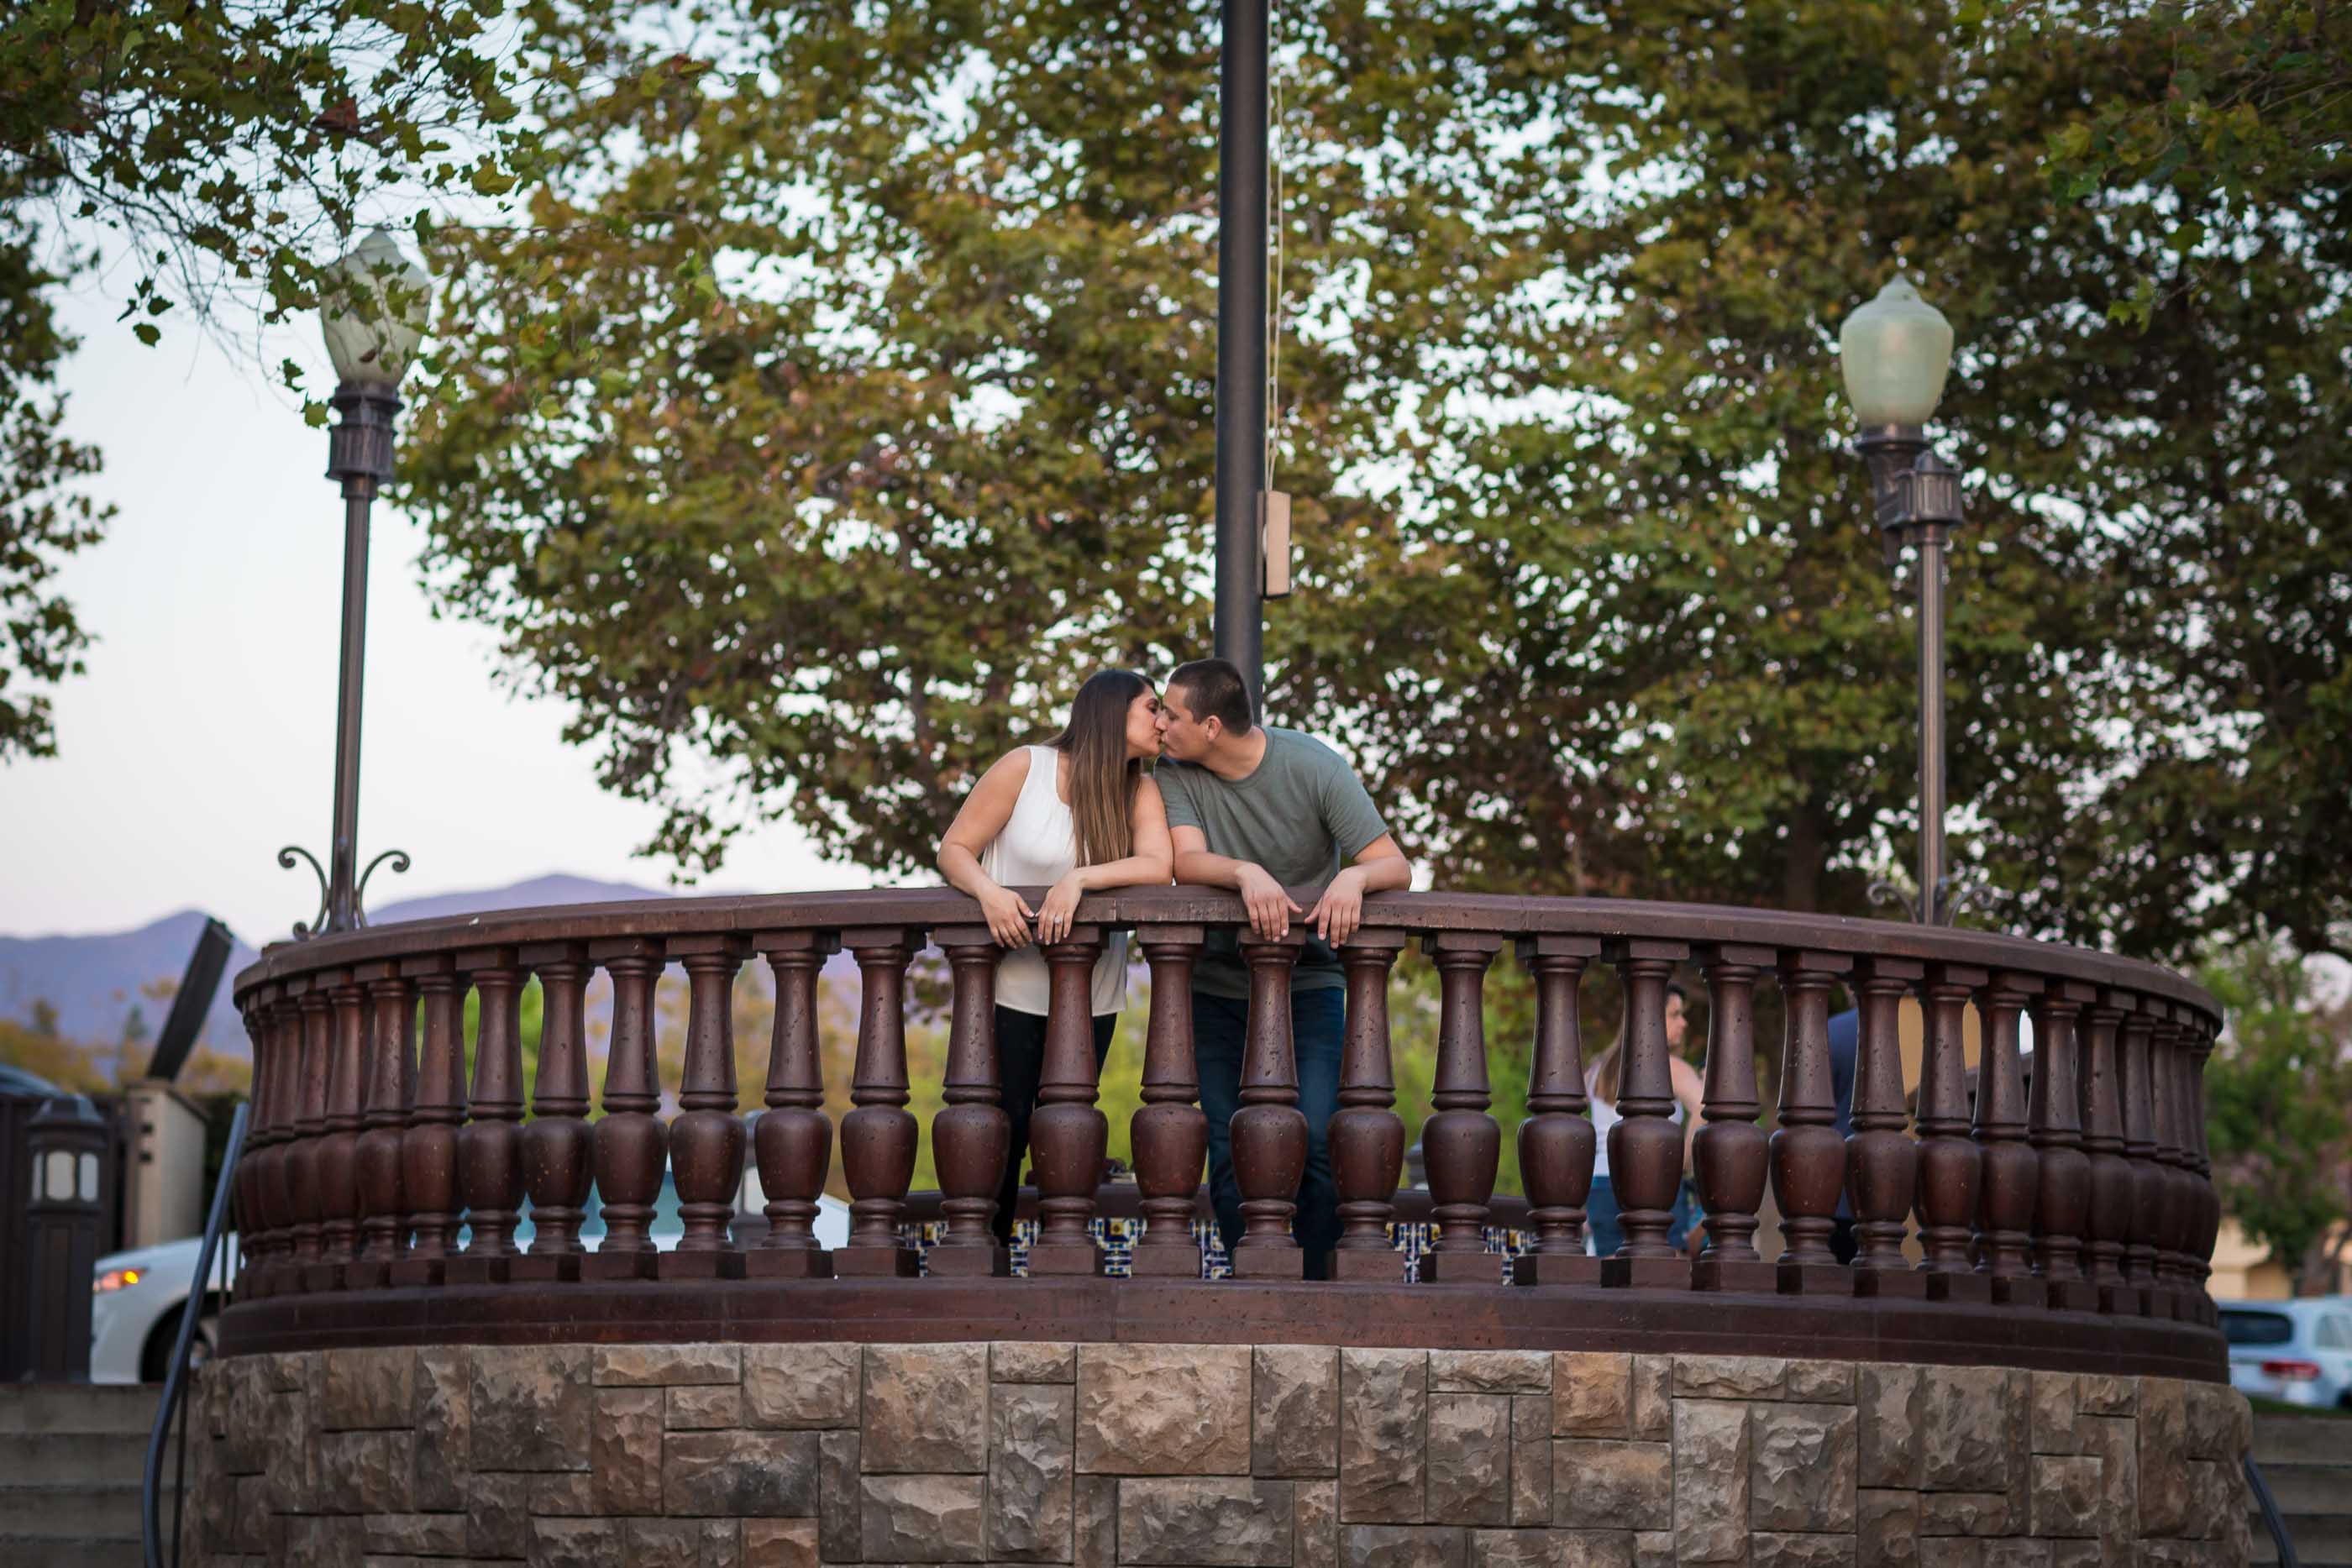 On the Balcony we find Jonny Natalia Engagement images at Mission Viejo